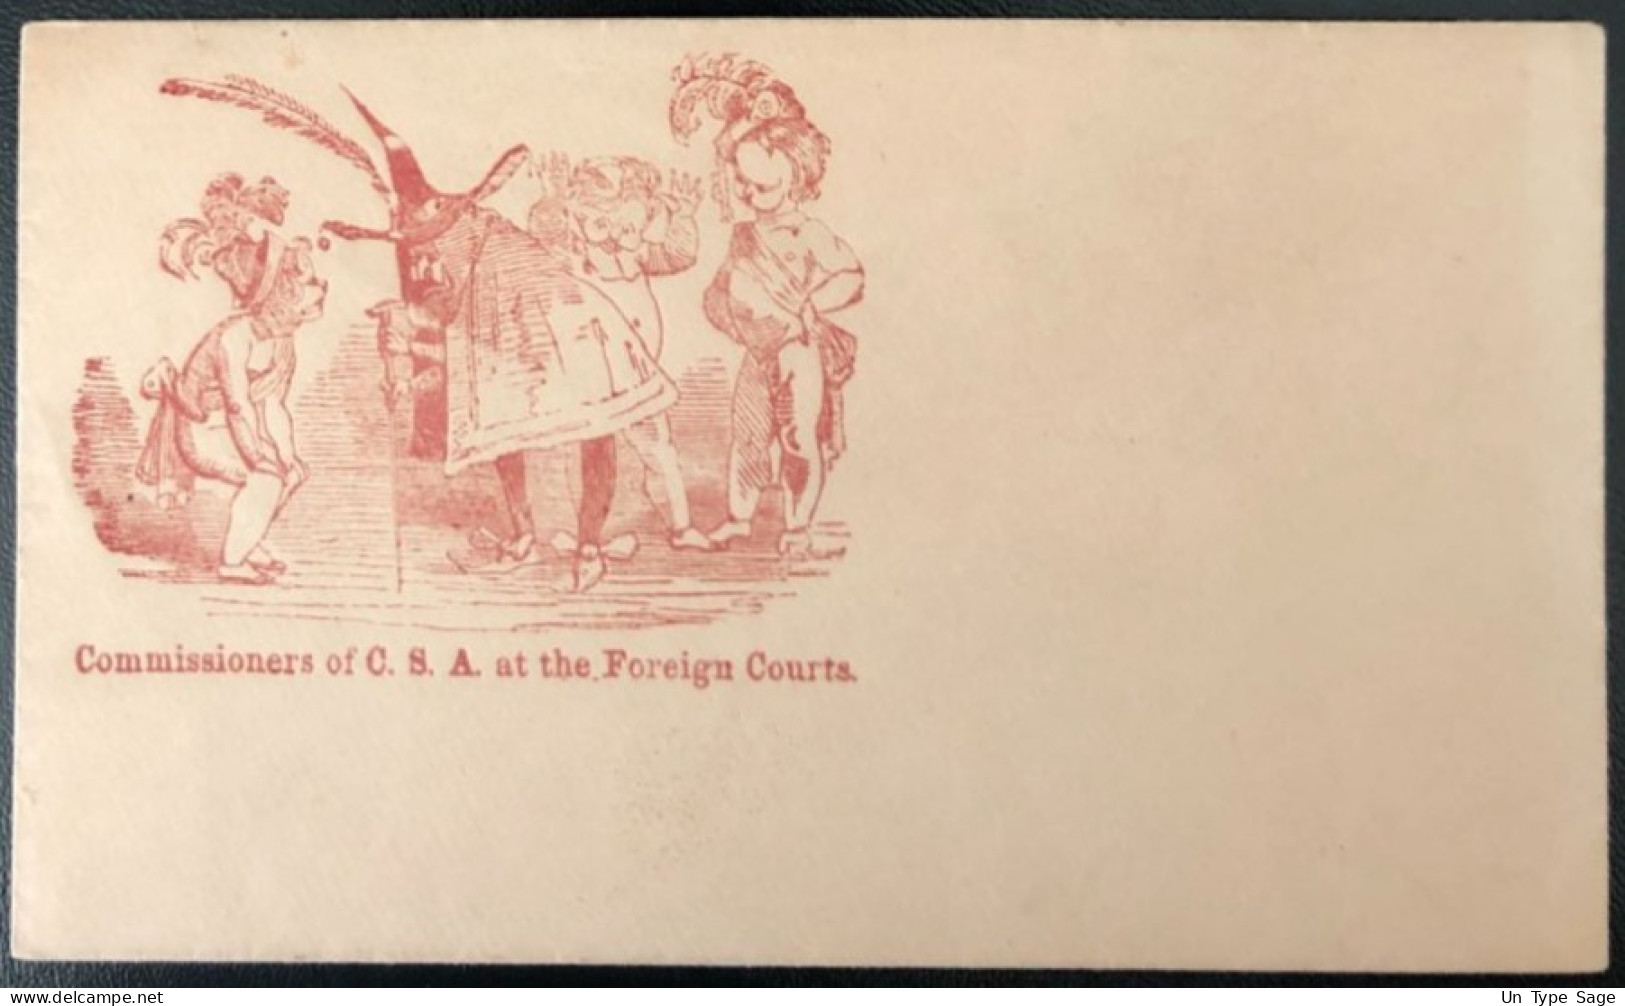 U.S.A, Civil War, Patriotic Cover - "Commissioners Of C.S.A At The Foreig Courts" - Unused - (C496) - Postal History